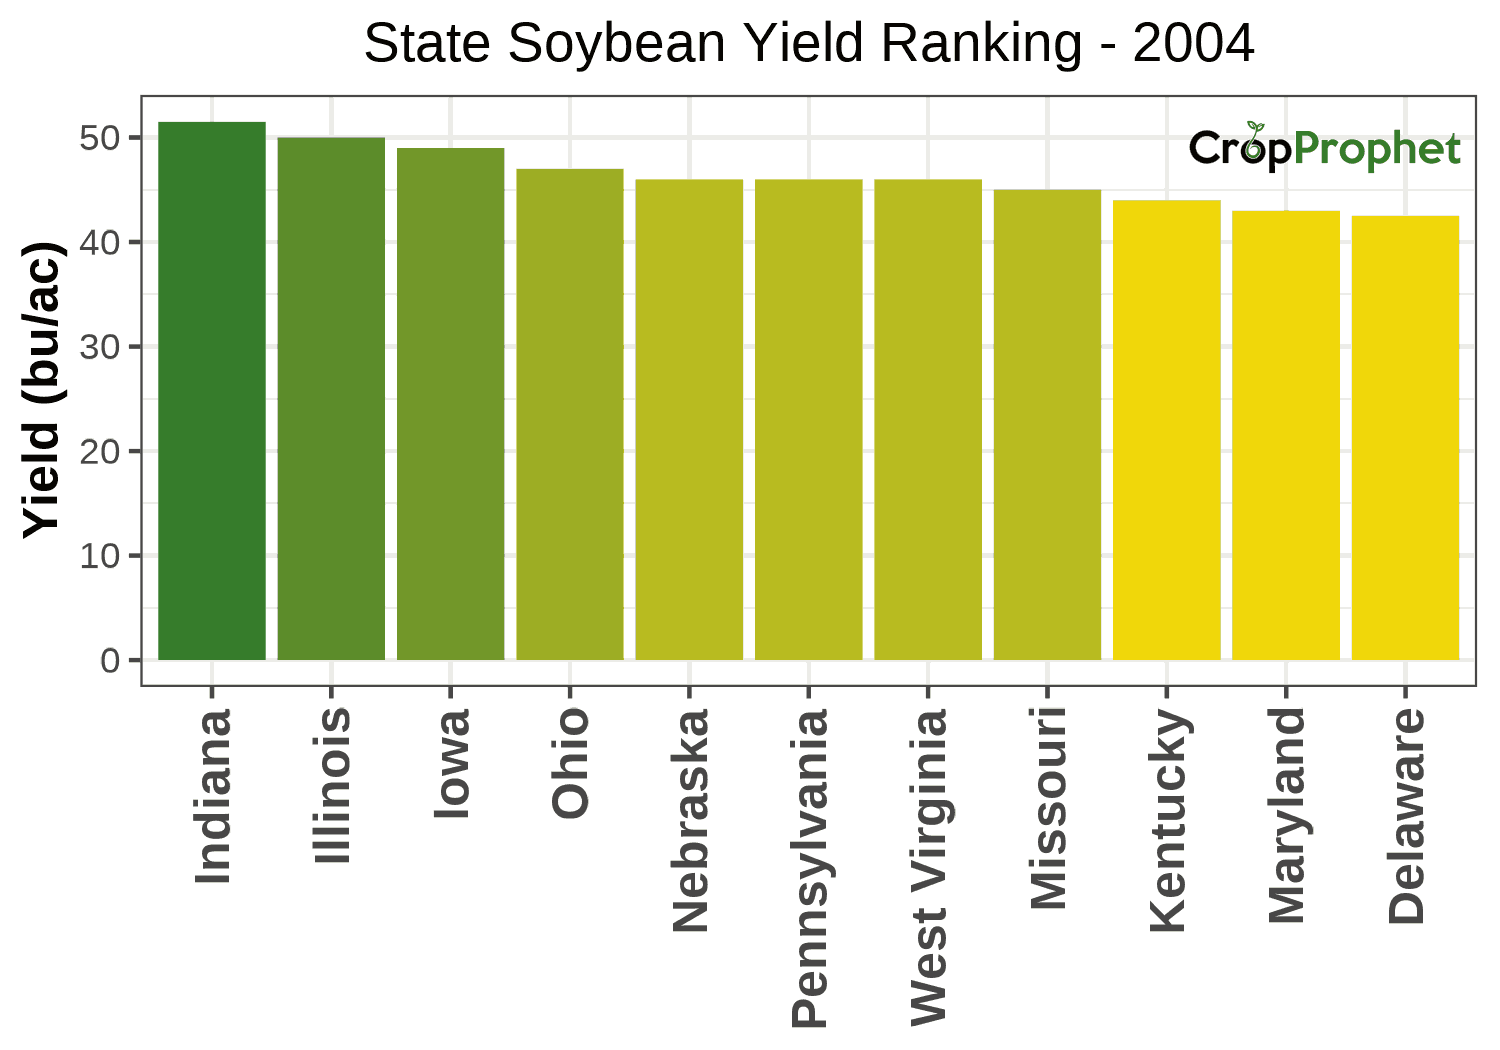 Soybean Production by State - 2004 Rankings